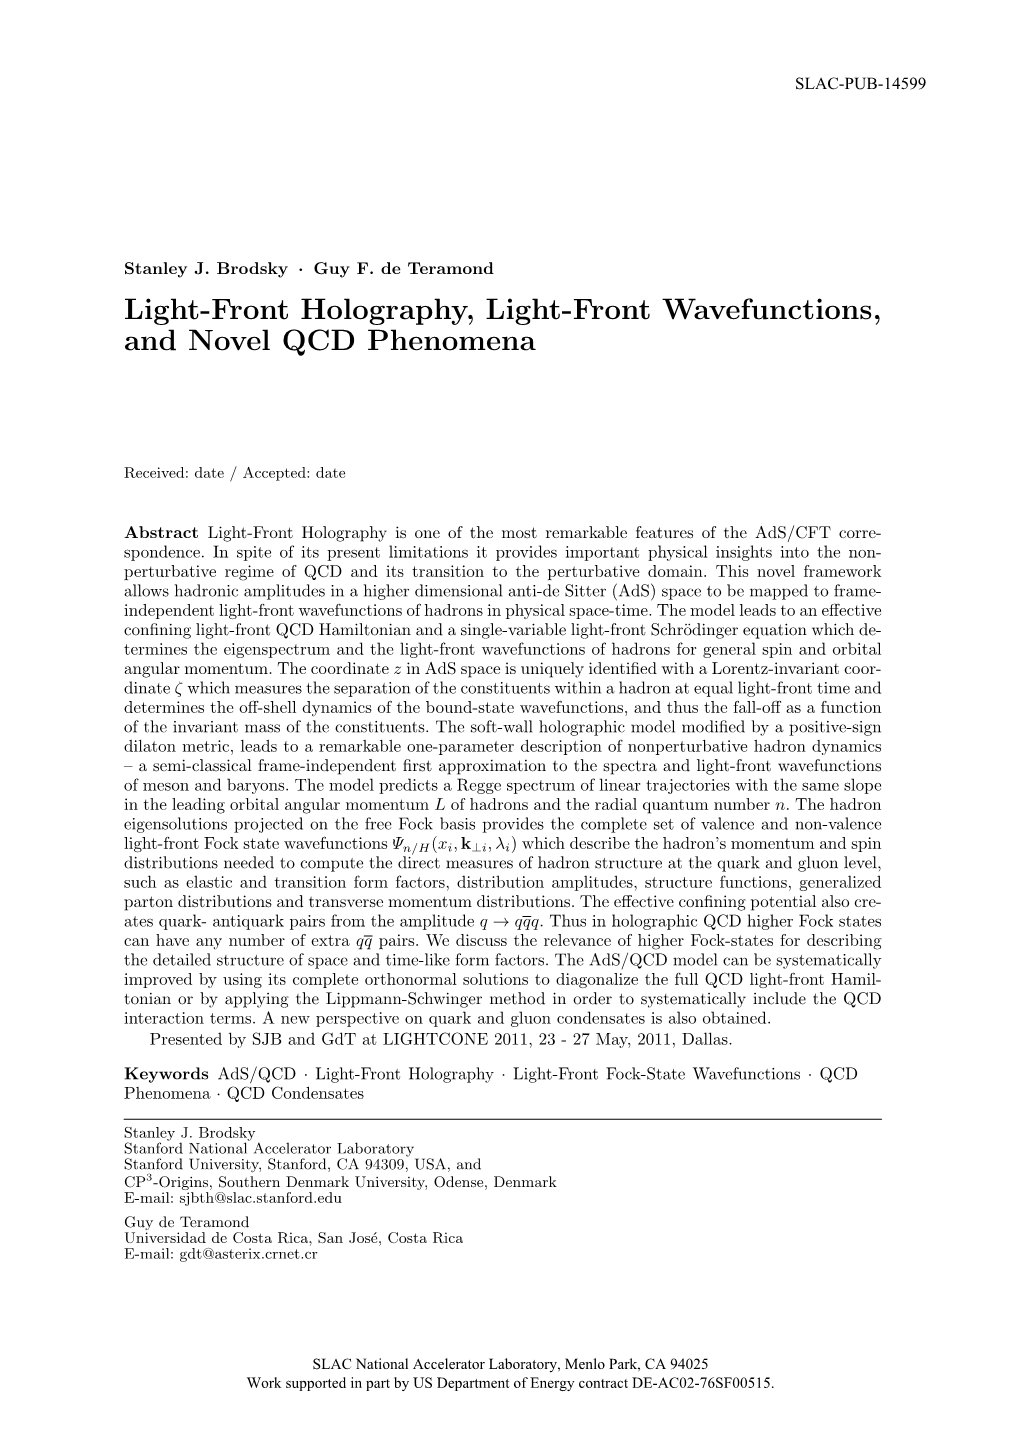 Light-Front Holography, Light-Front Wavefunctions, and Novel QCD Phenomena